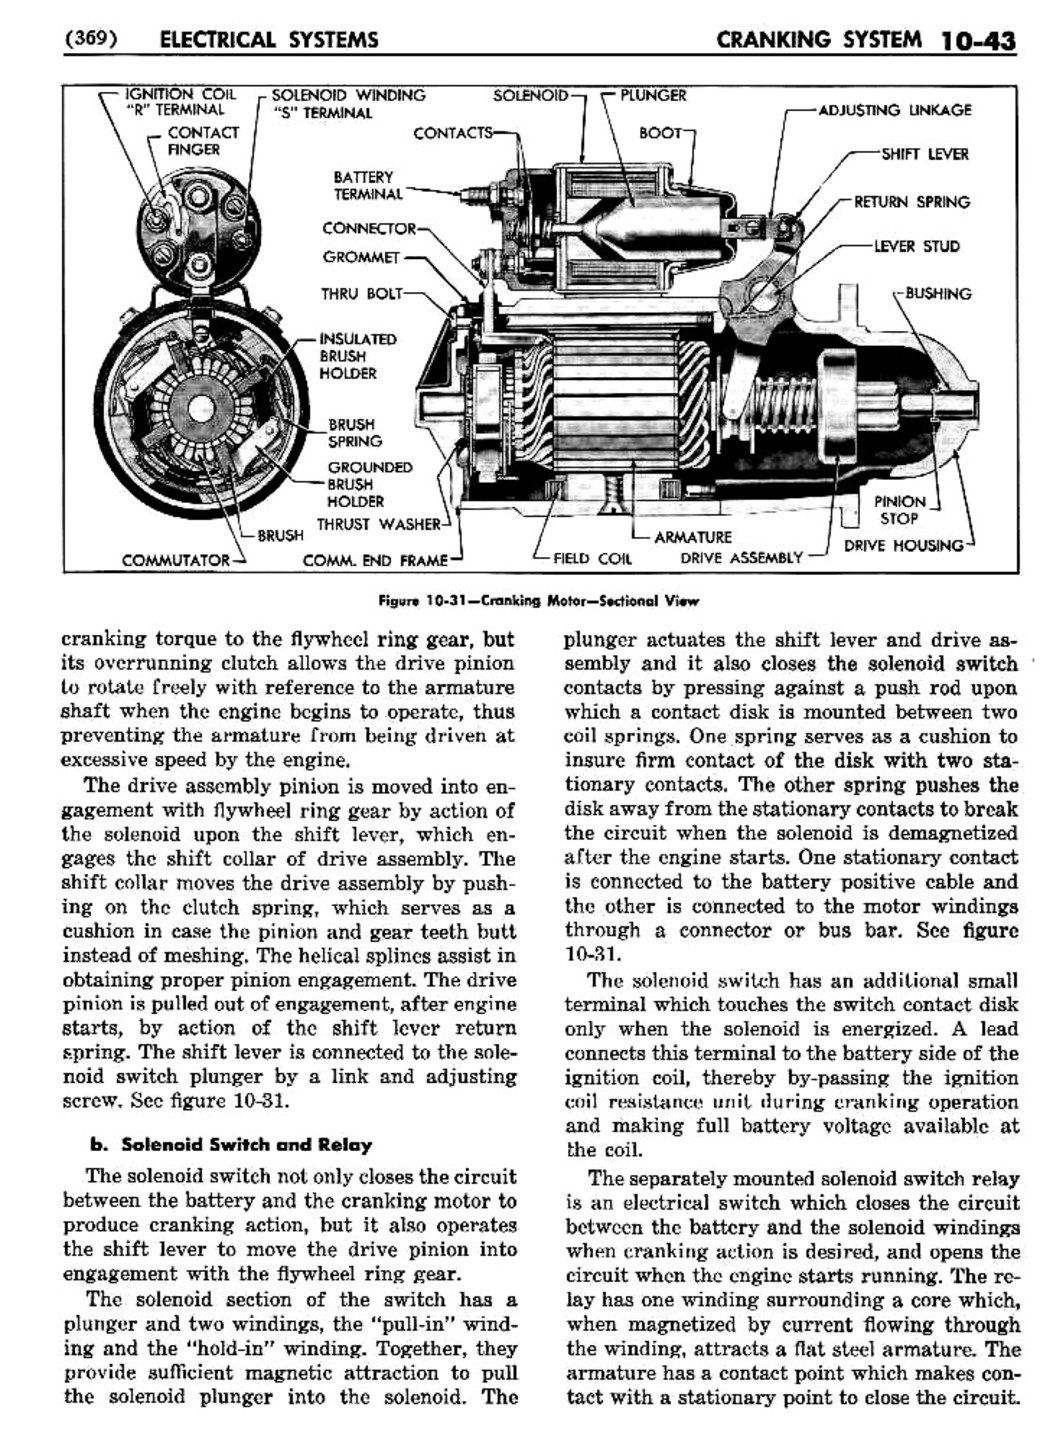 n_11 1956 Buick Shop Manual - Electrical Systems-043-043.jpg